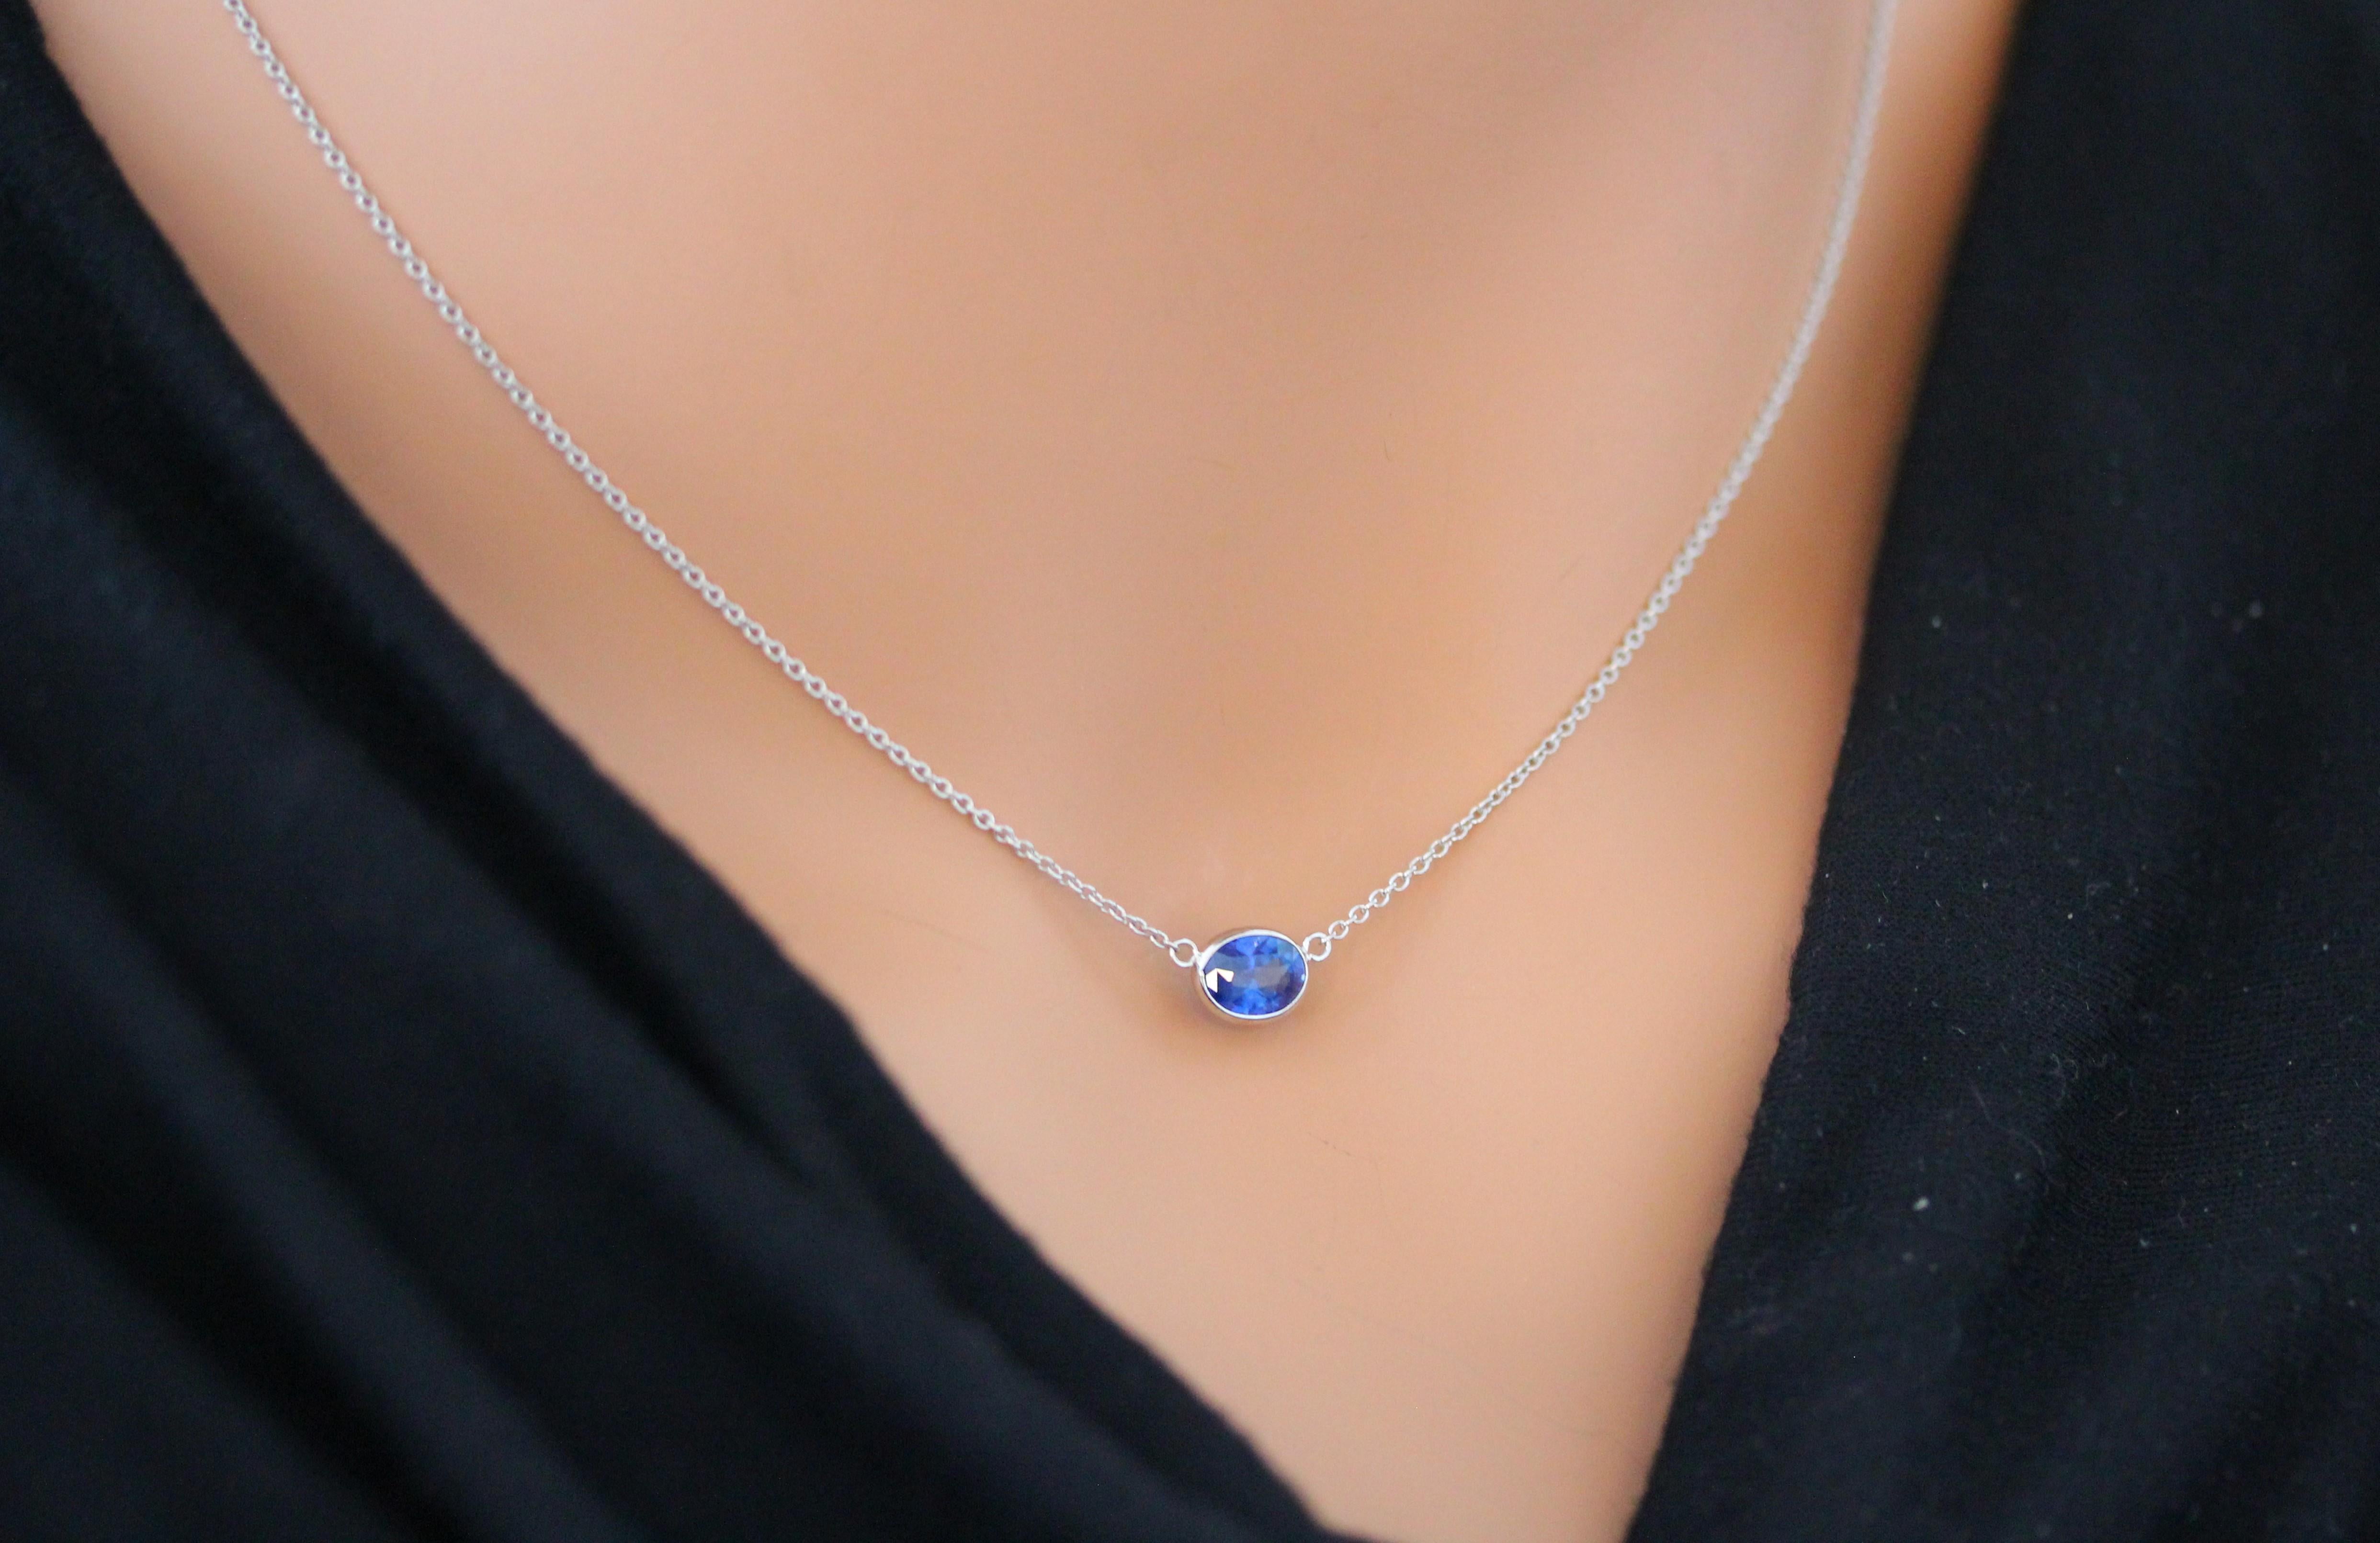 Oval Cut 1.53 Carat Oval Sapphire Blue Fashion Necklaces In 14k White Gold For Sale